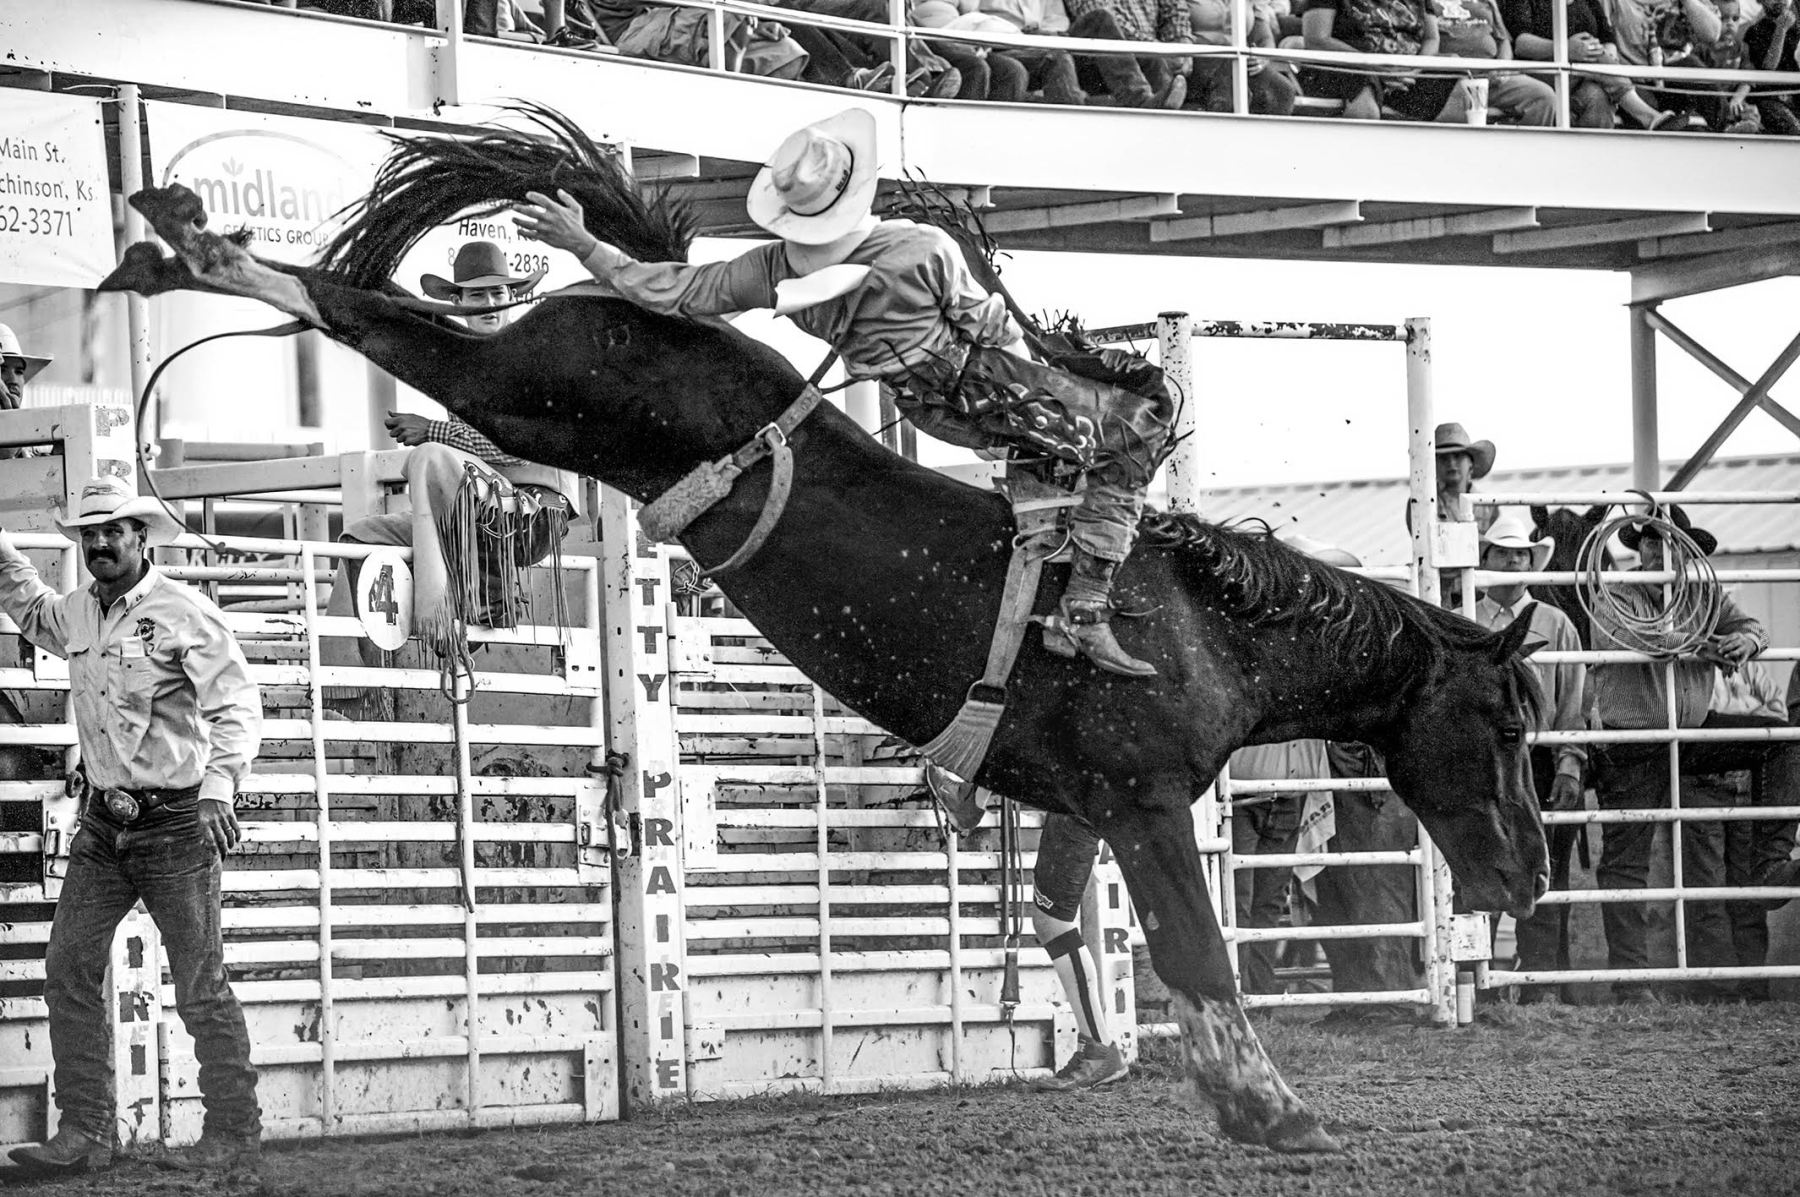 “The title of this picture is The Beast. It was shot in Kansas at a rodeo. To me, the horse looks like this massive beast,” Krantz says,” If you look at the size of the horse and the size of the guy, you're like, ‘Holy cow. How can you stay on something like that?’ He's a bronco rider. This guy is probably not getting bucked off yet. He's in a pretty great position right there. But he probably will not last for more than four seconds.”